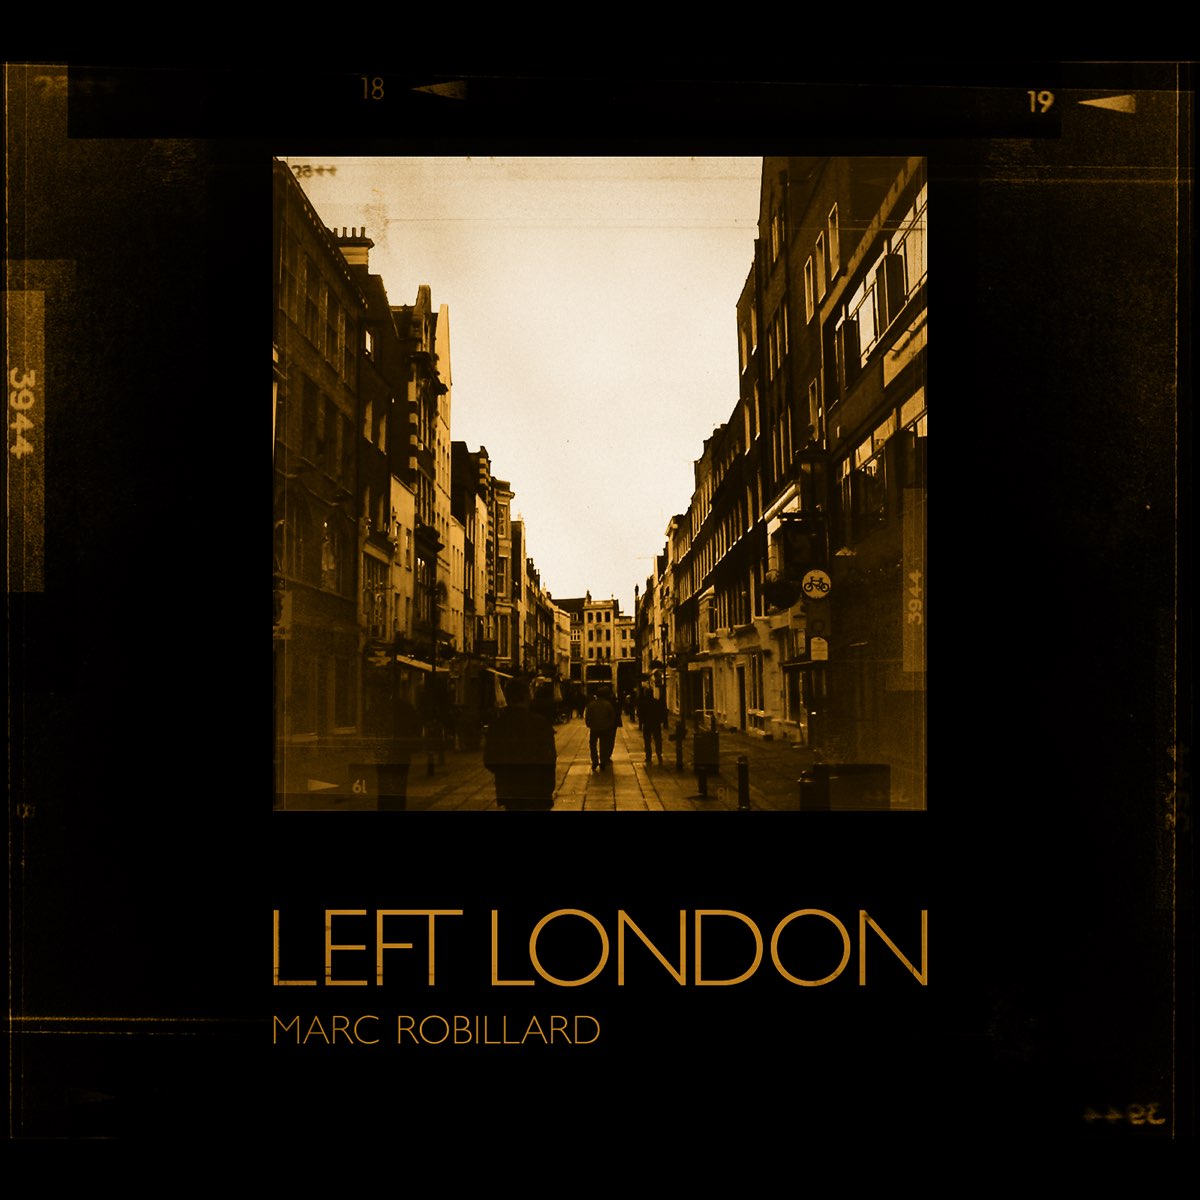 Leave for london. Marc Robillard - Forever young. Left at London.